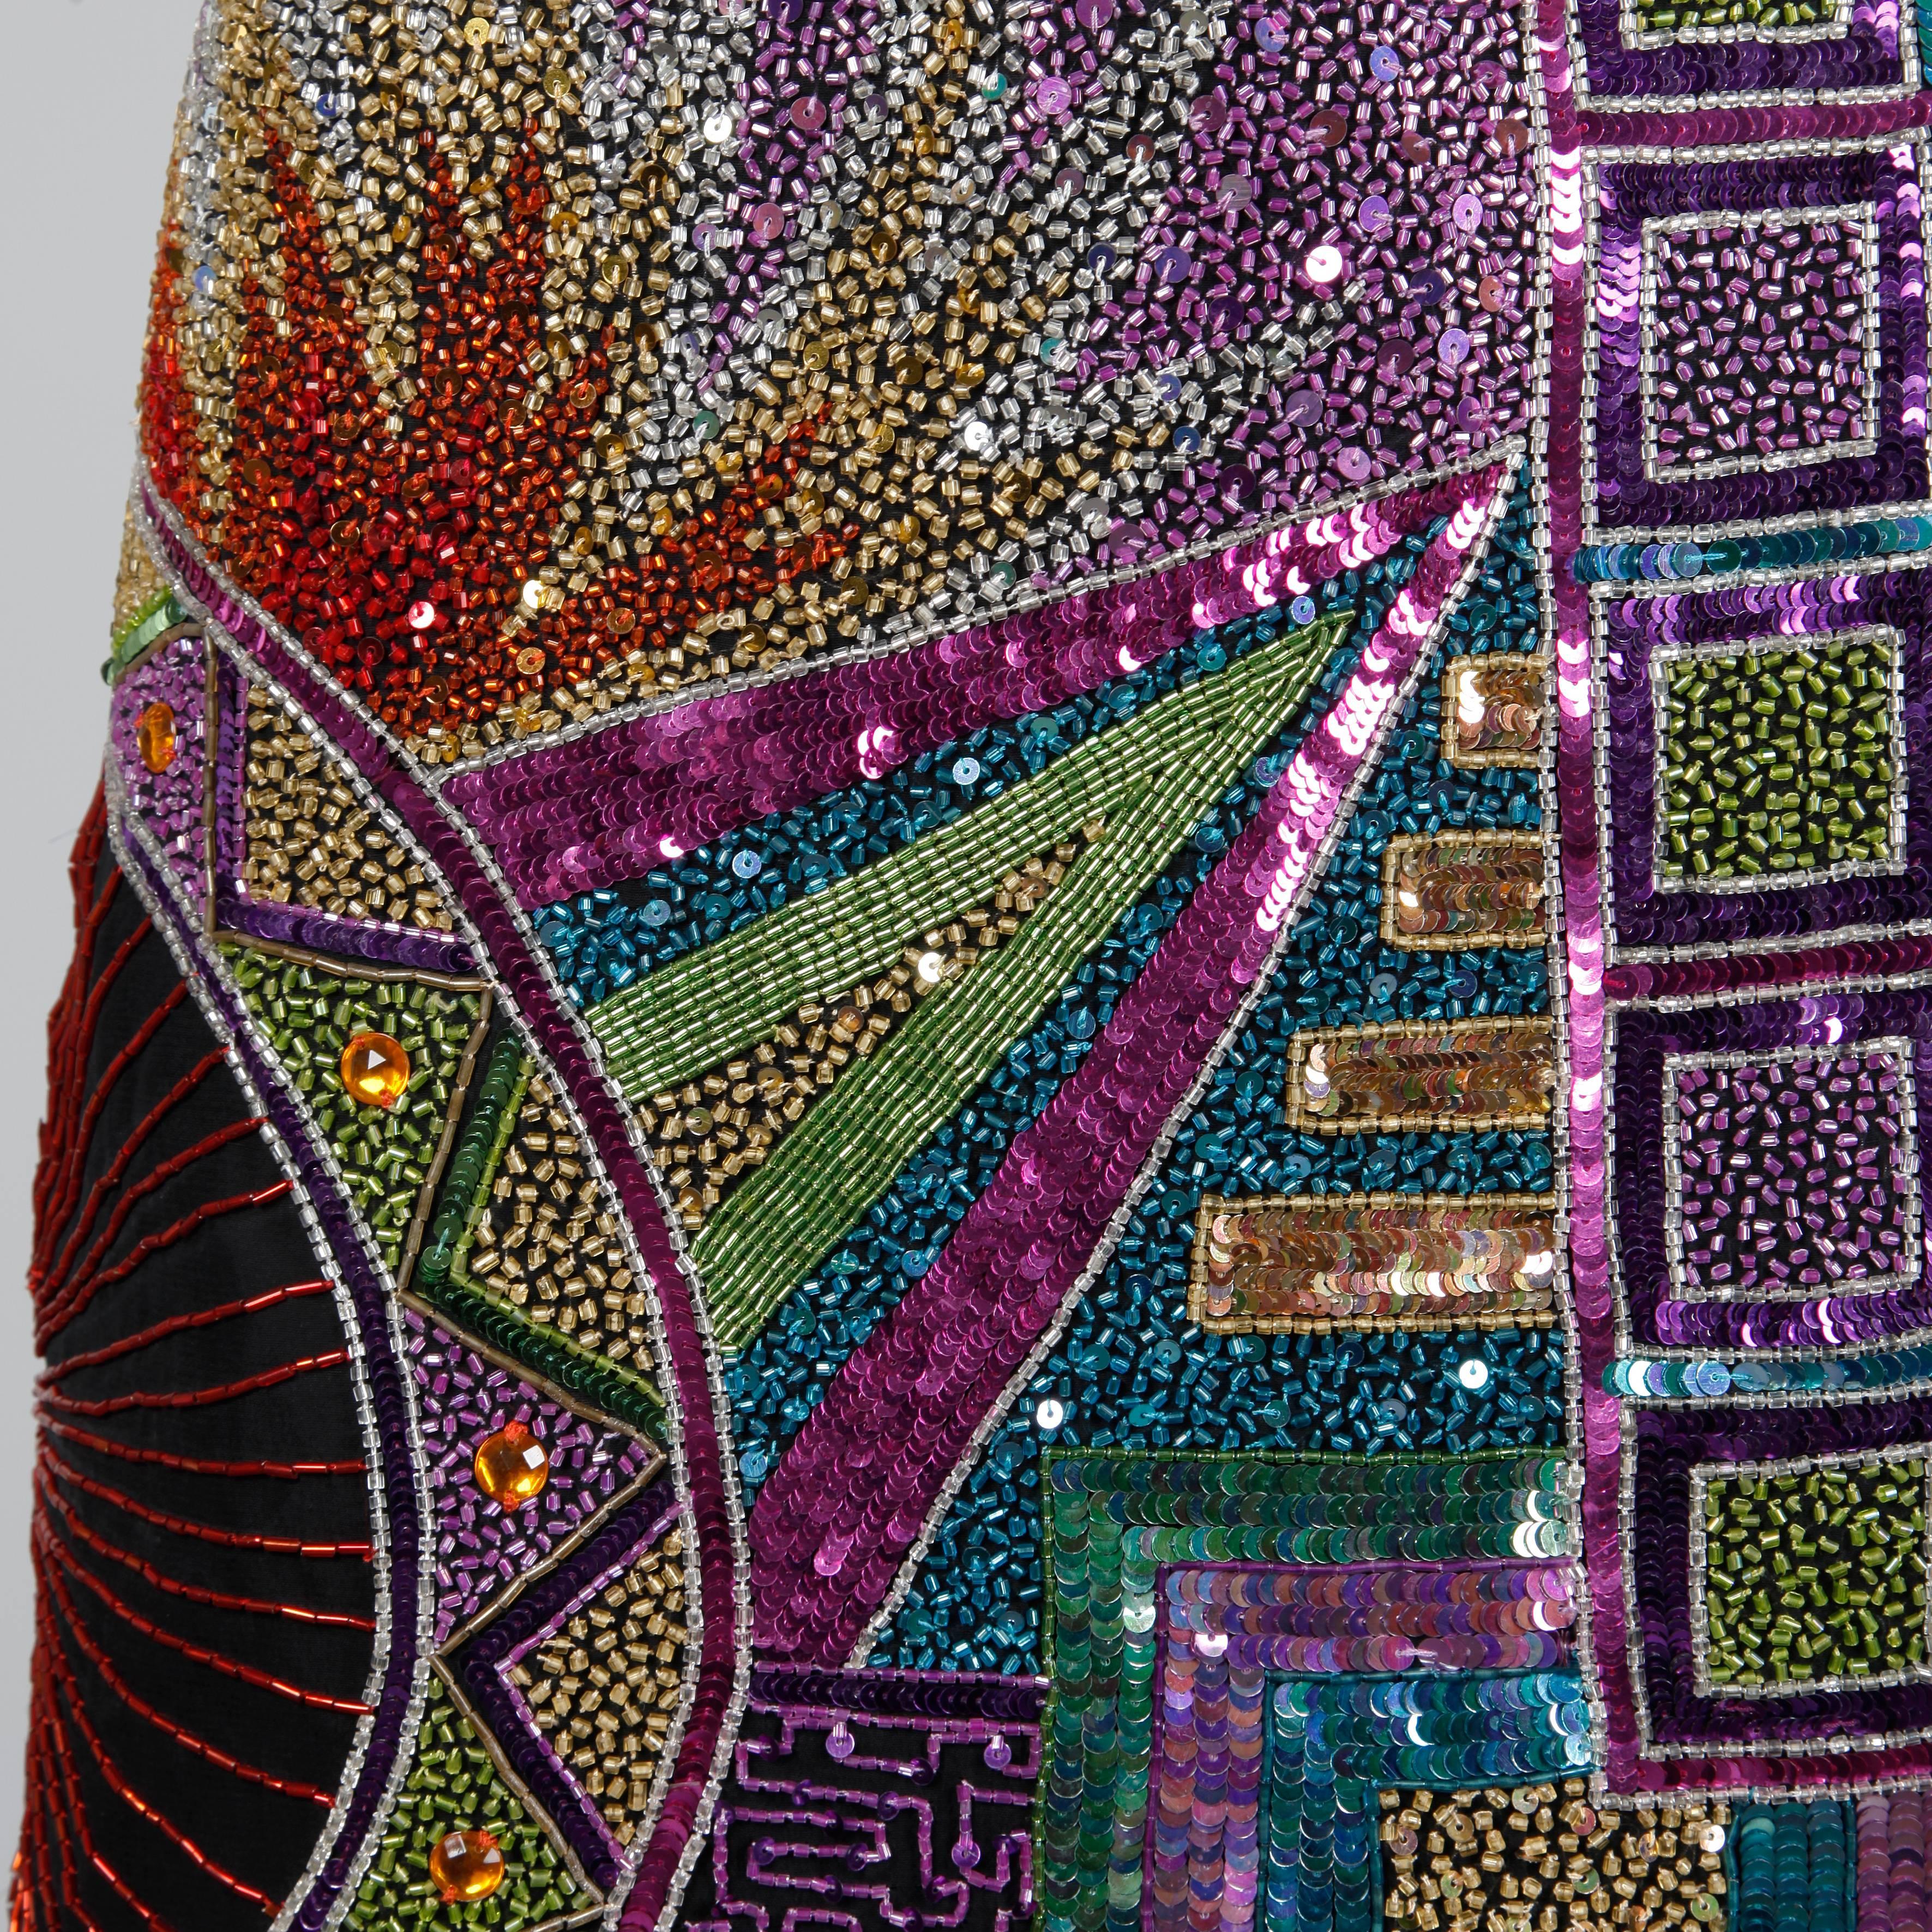 Incredible vintage Naeem Khan silk dress encrusted with thousands of tiny sparkling sequins and beads. This dress is HEAVY! Fully lined with rear zip and hook closure. Structured shoulder pads can easily be removed if desired. 100% pure silk. The